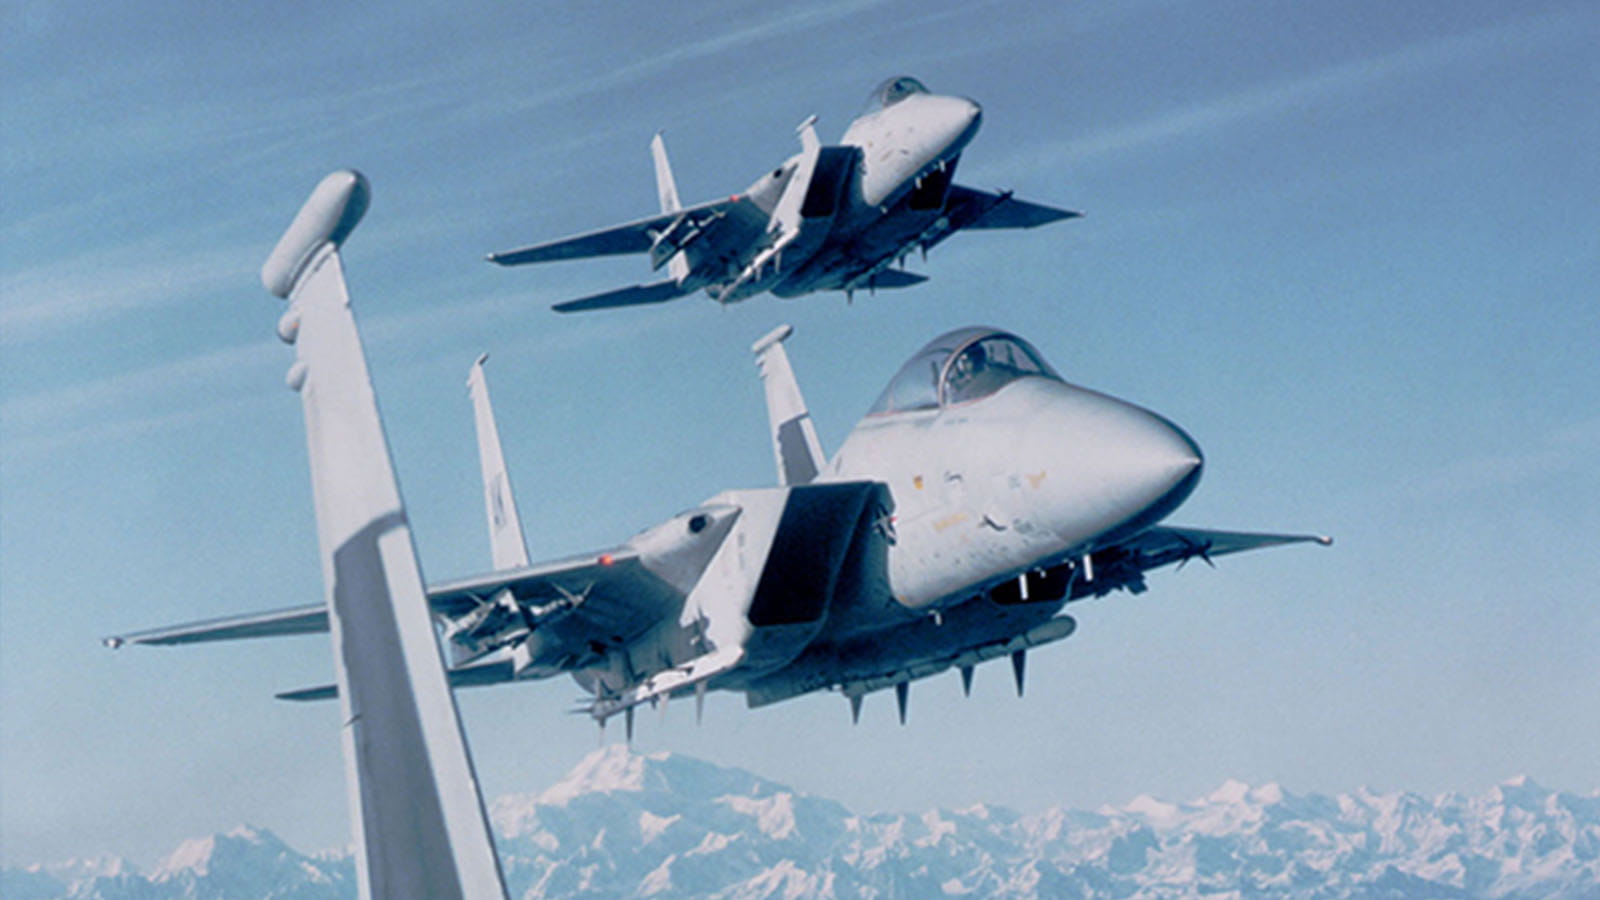 All F-15s were equipped with Hughes APG-63 or APG-70 radars.